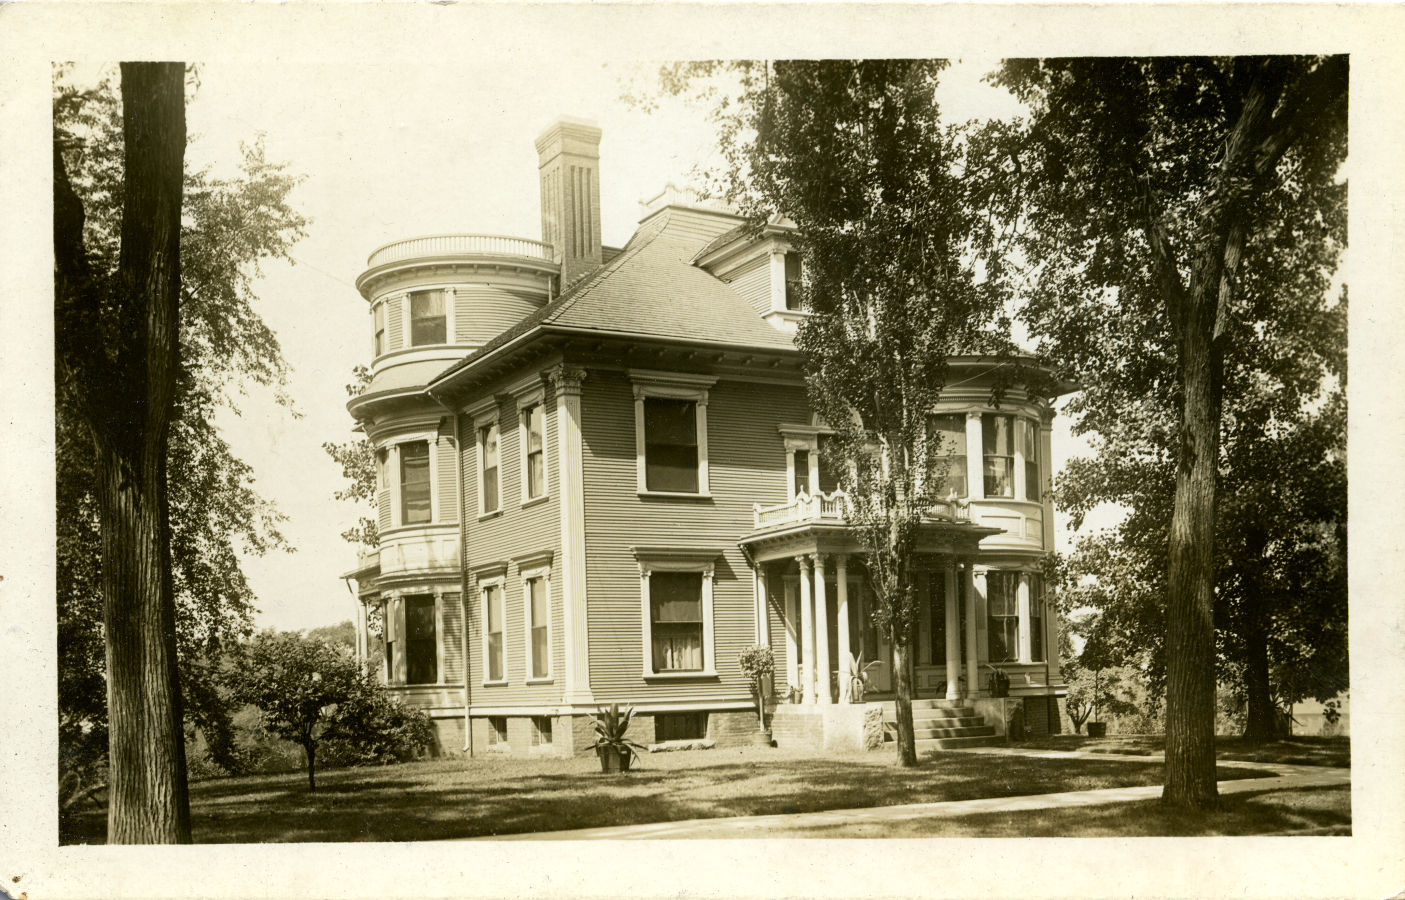 Unknown house with third floor turrett